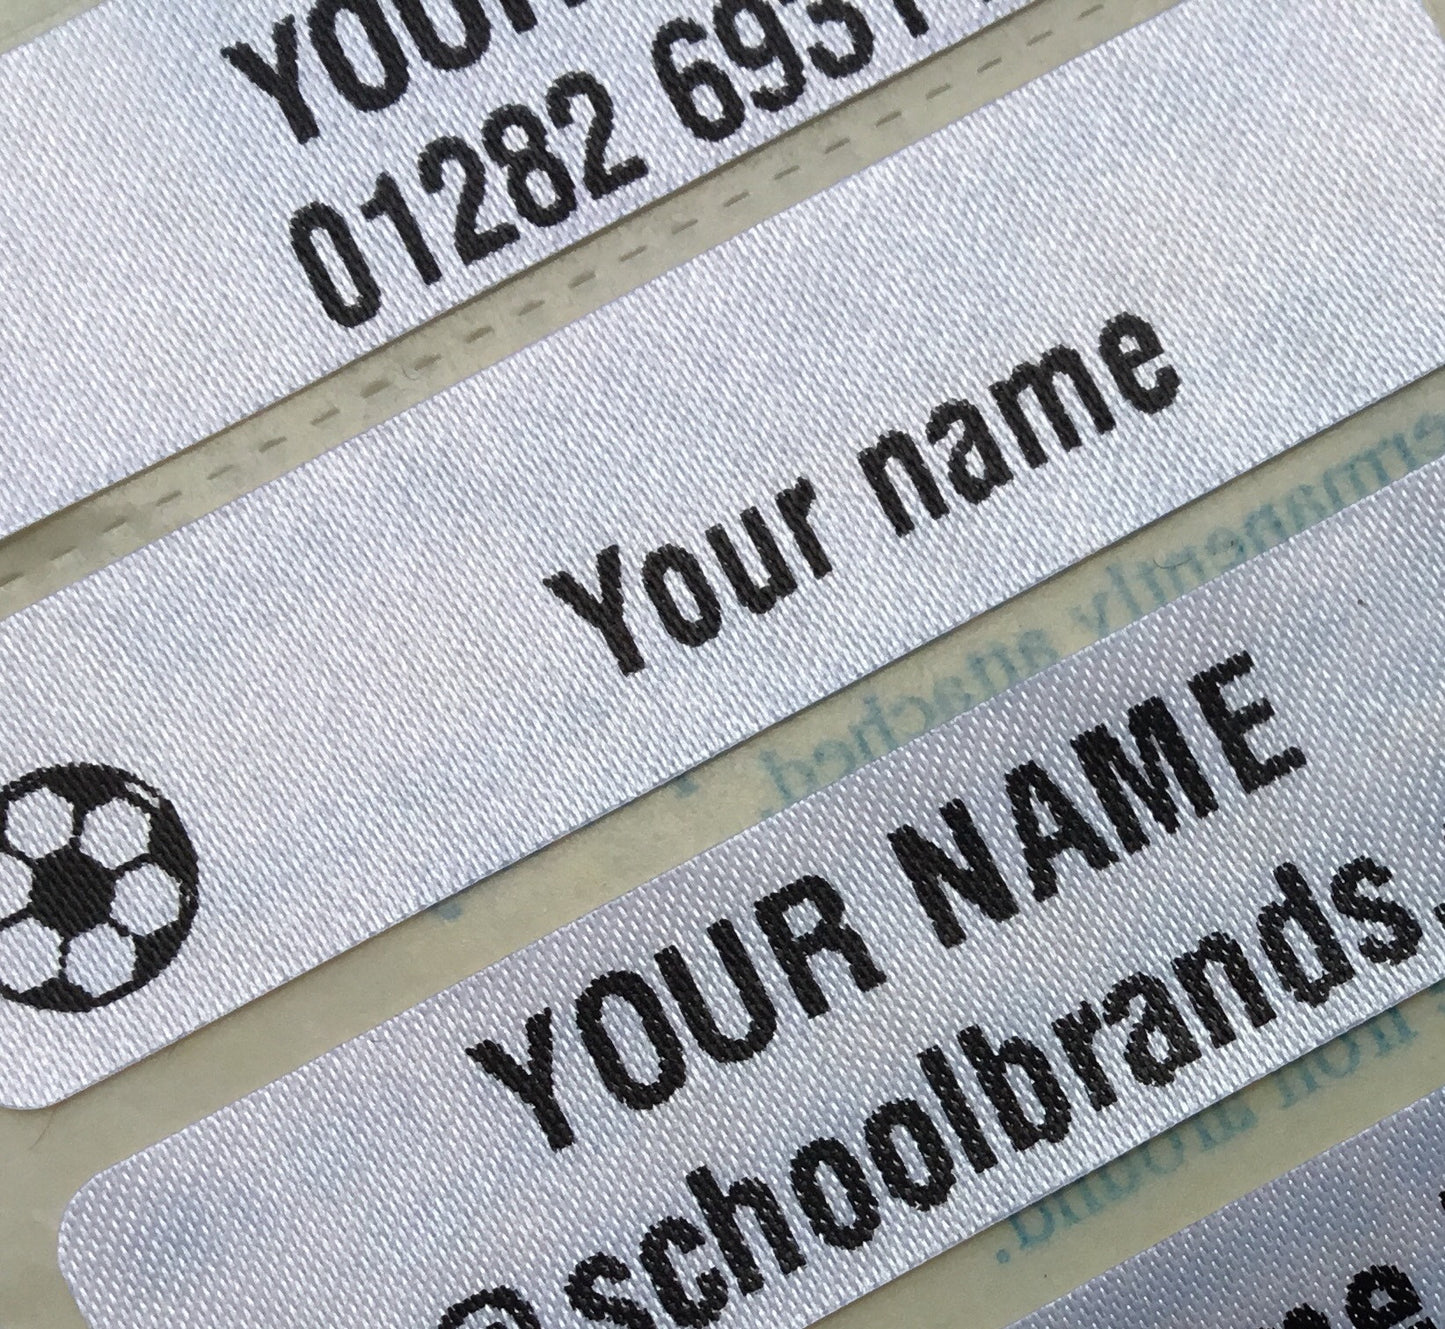 2 x IRON-ON NAME LABELS - School Brands